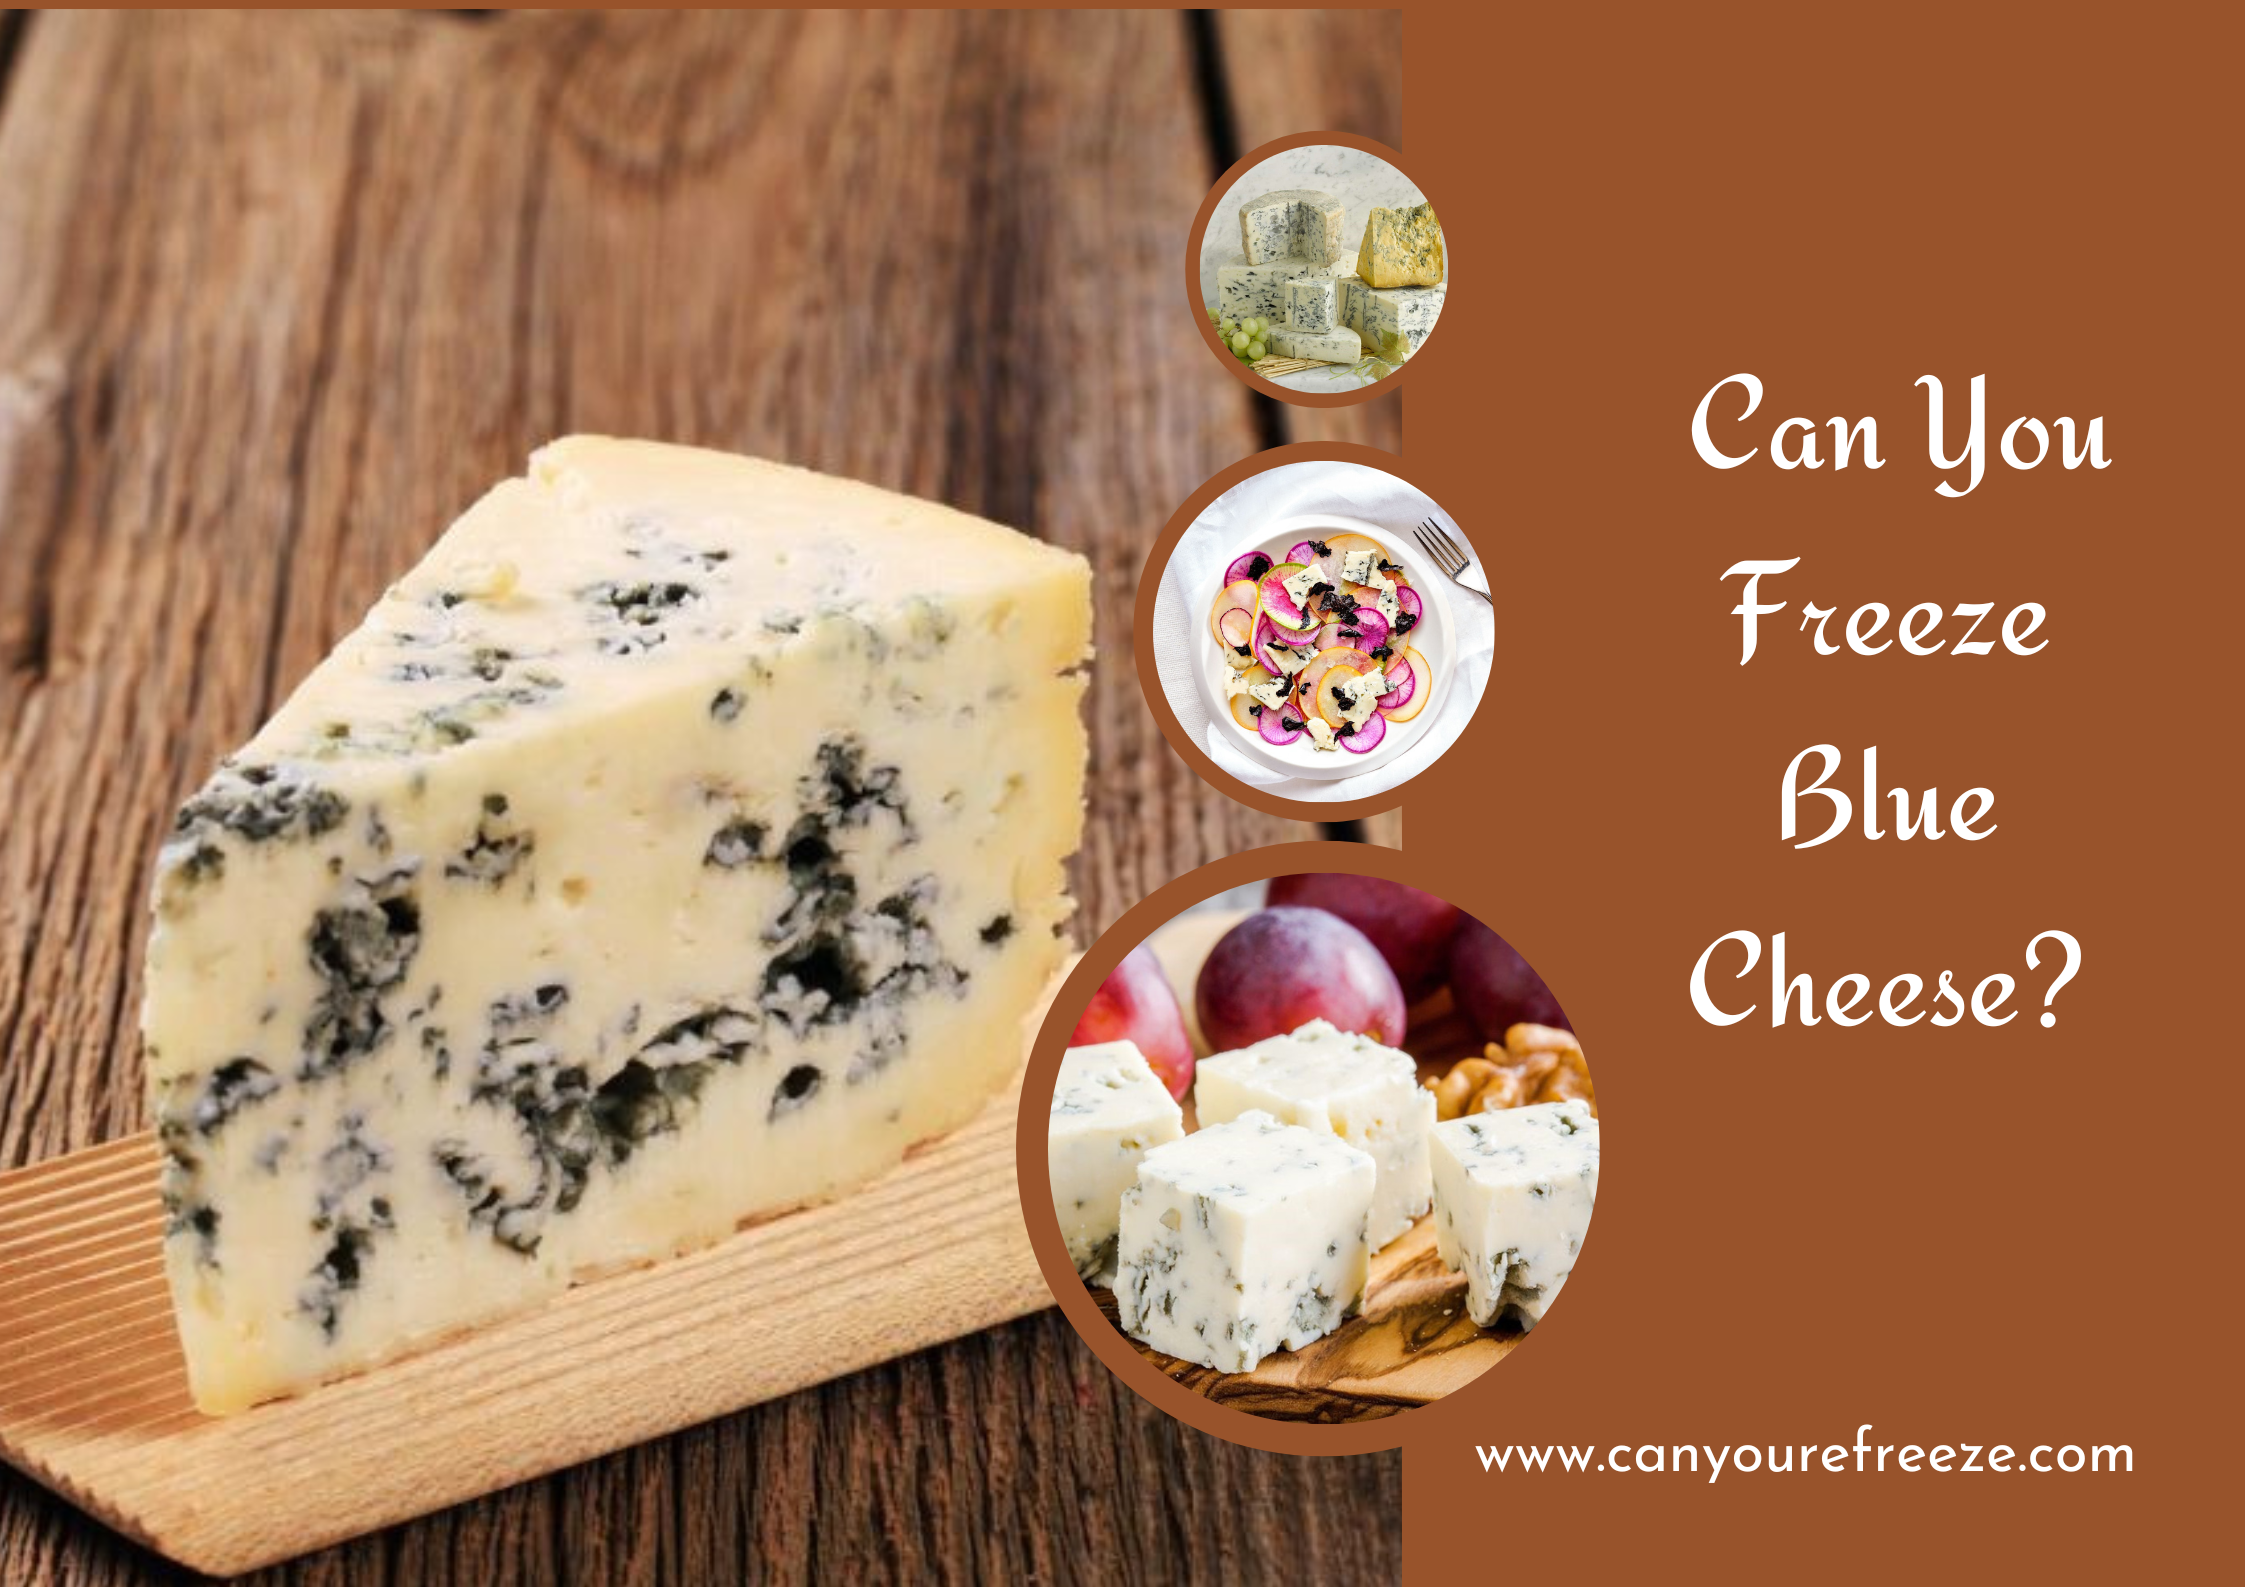 Can You Freeze Blue Cheese